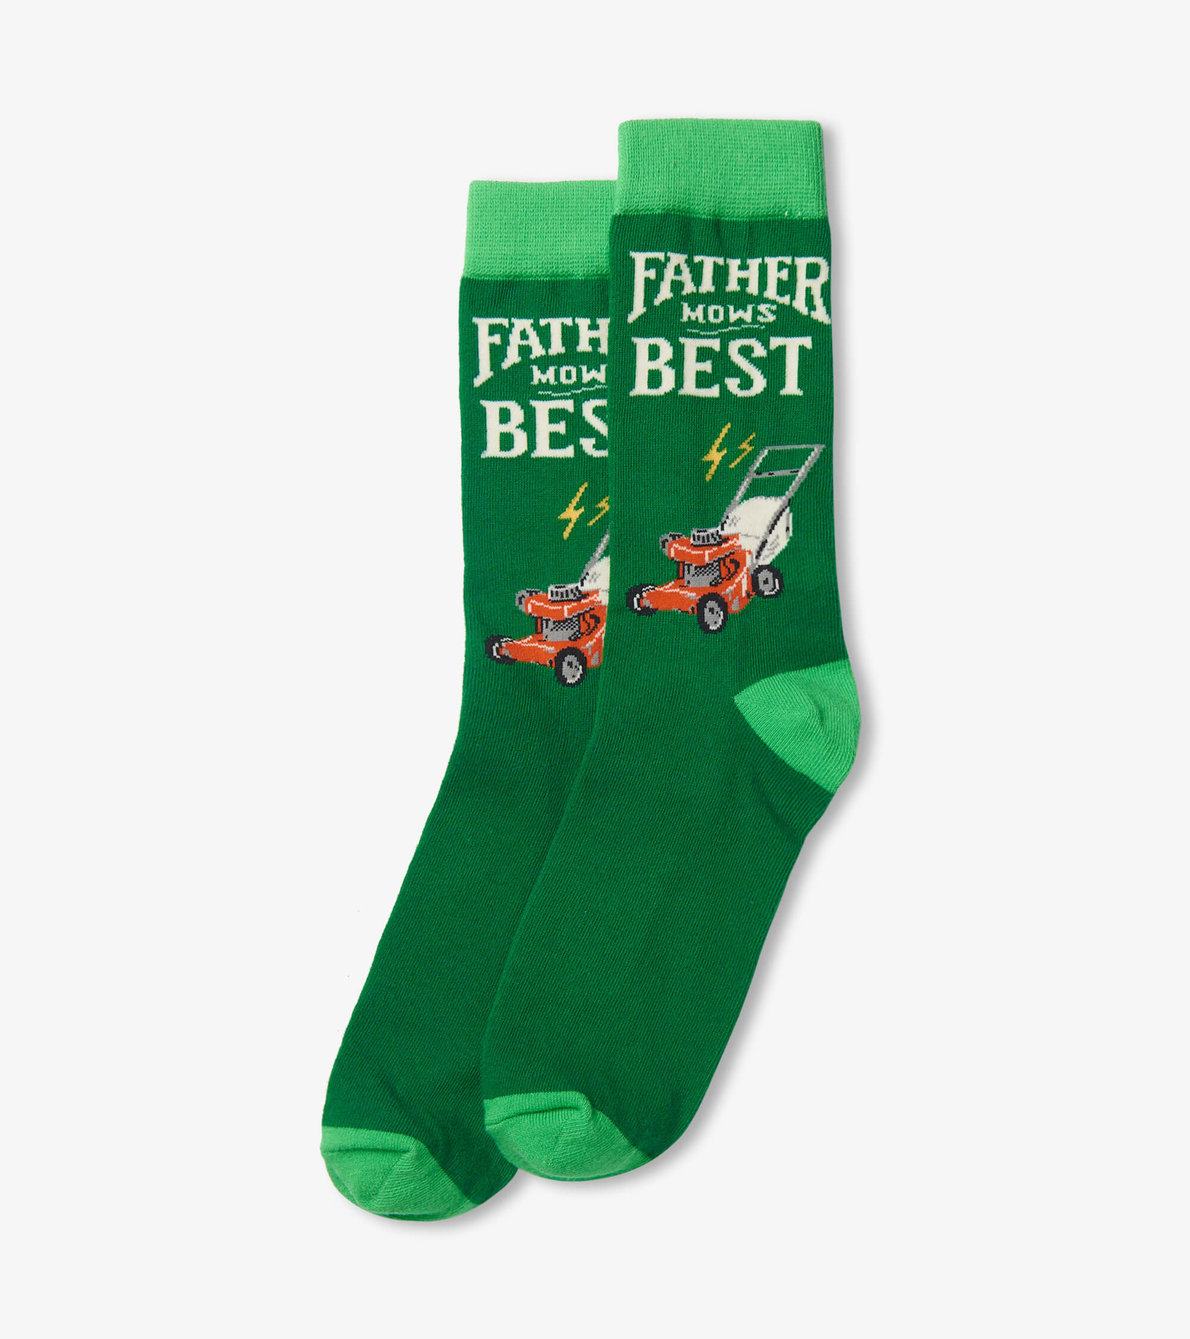 View larger image of Father Mows Best Men's Crew Socks